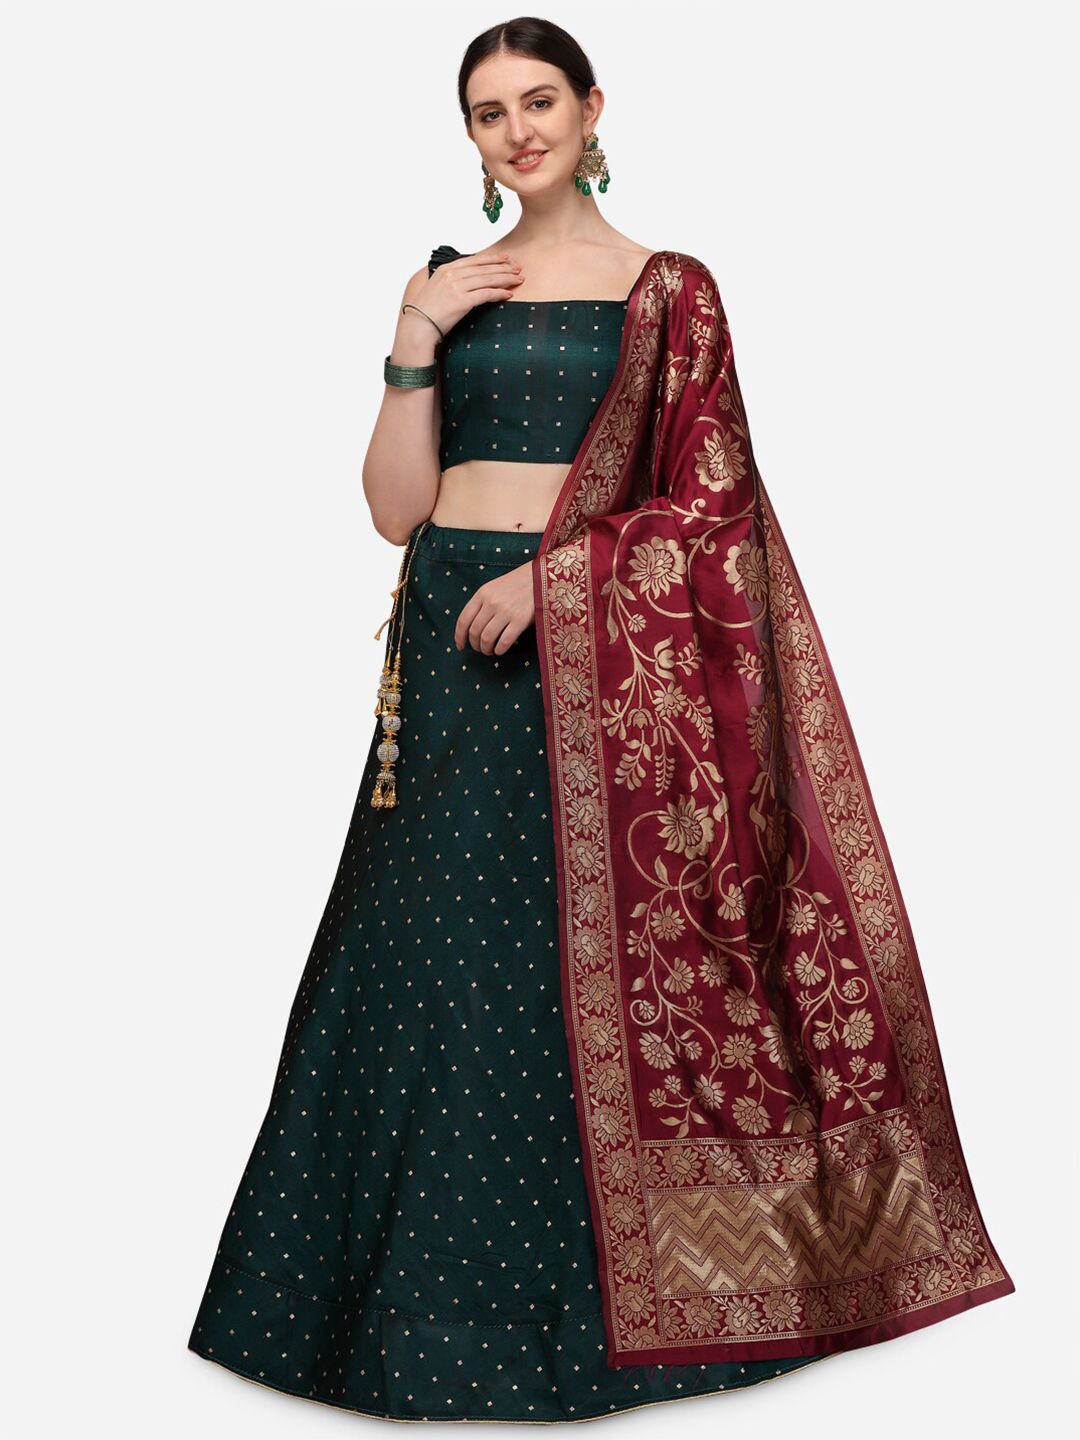 Mameraa Green & Maroon Semi-Stitched Lehenga & Unstitched Blouse With Dupatta Price in India